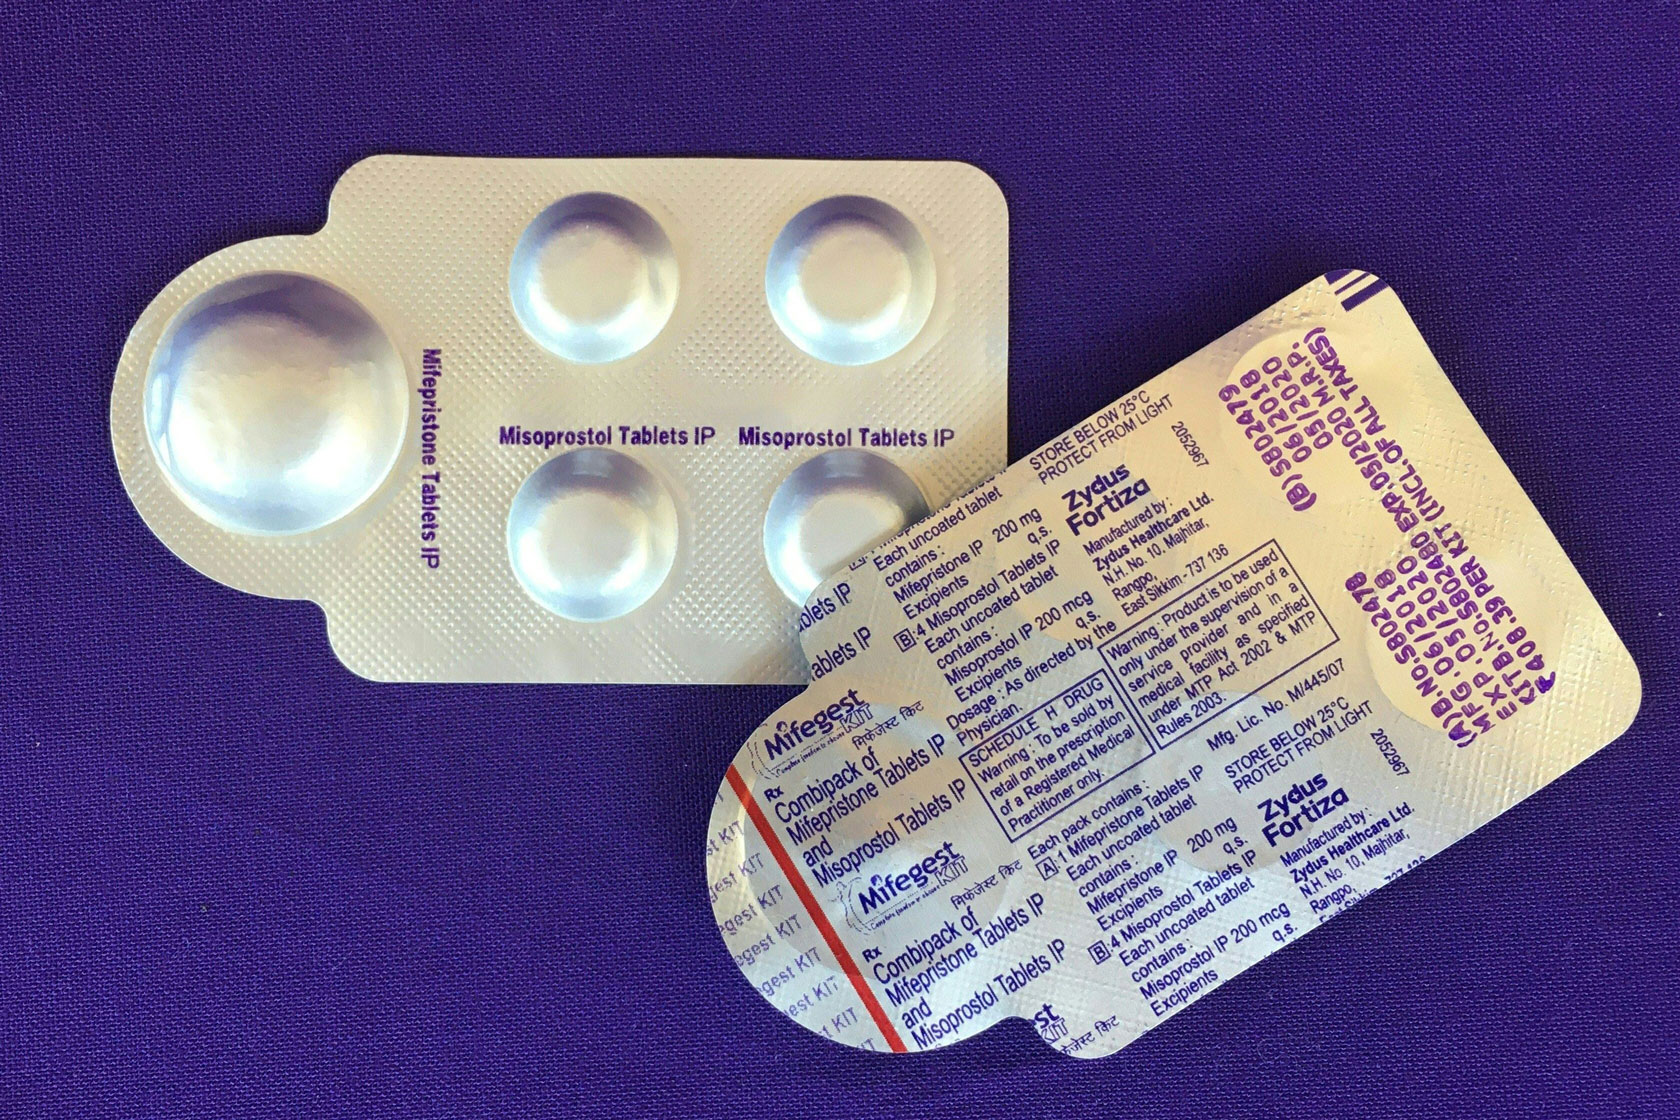 Unopened foil packets for two types of pills, which can be taken together for a medication abortion.